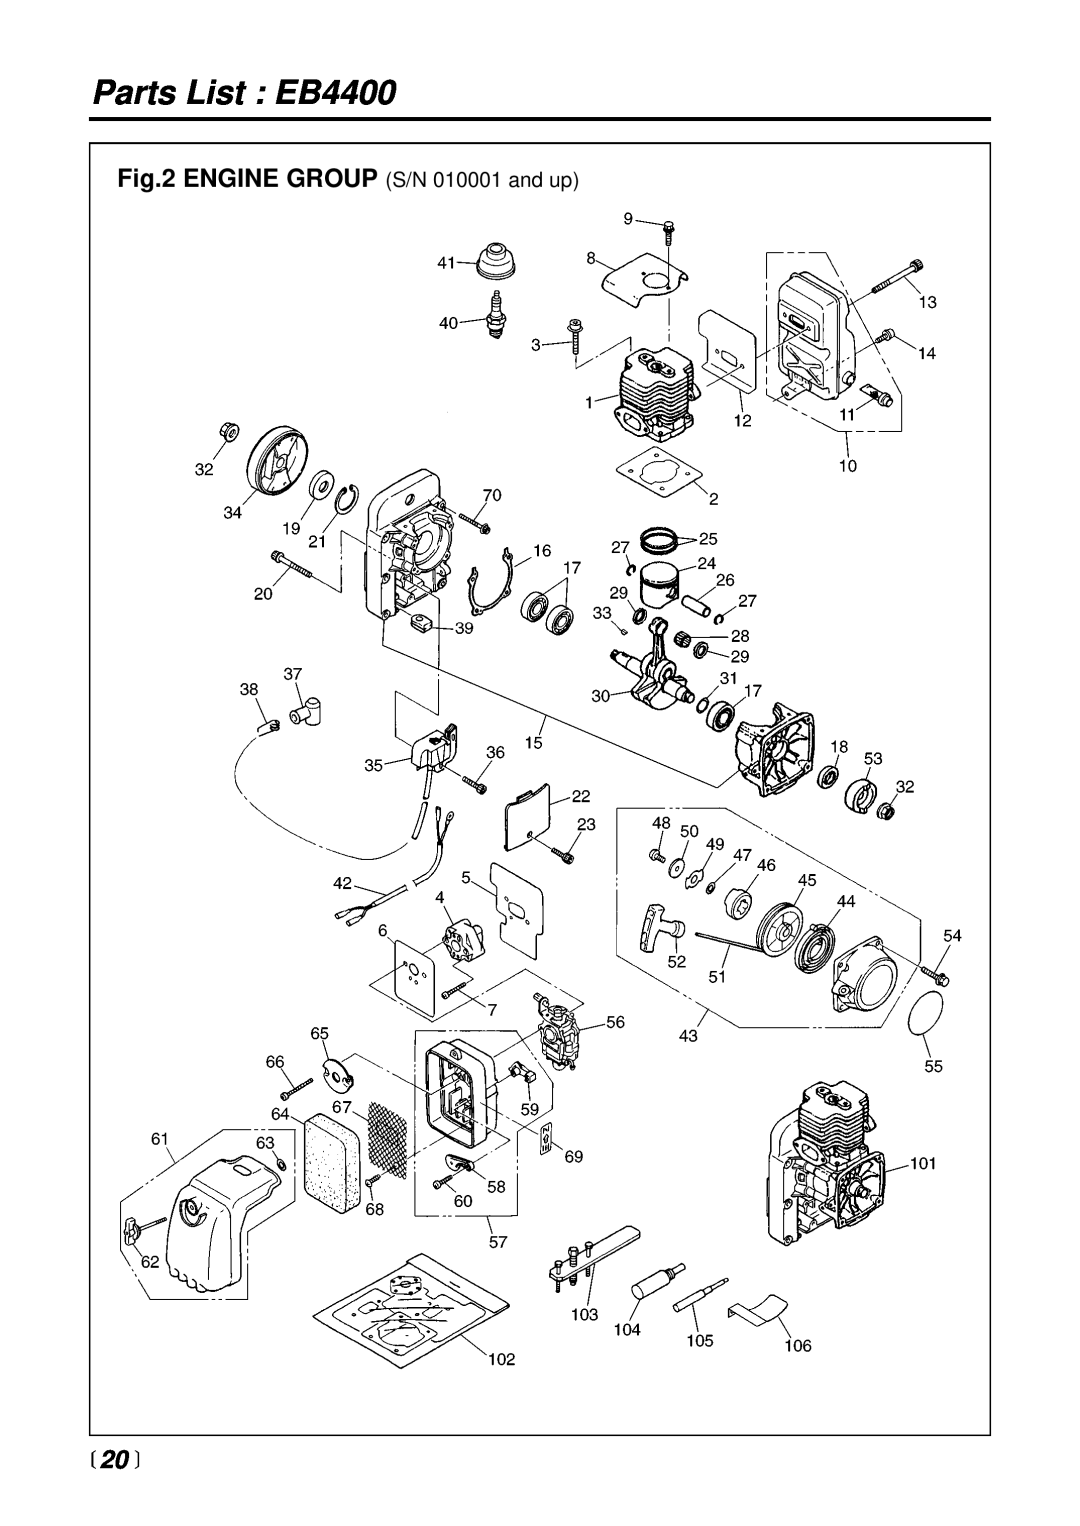 RedMax manual Parts List EB4400, ENGINE GROUP S/N 010001 and up,  20  